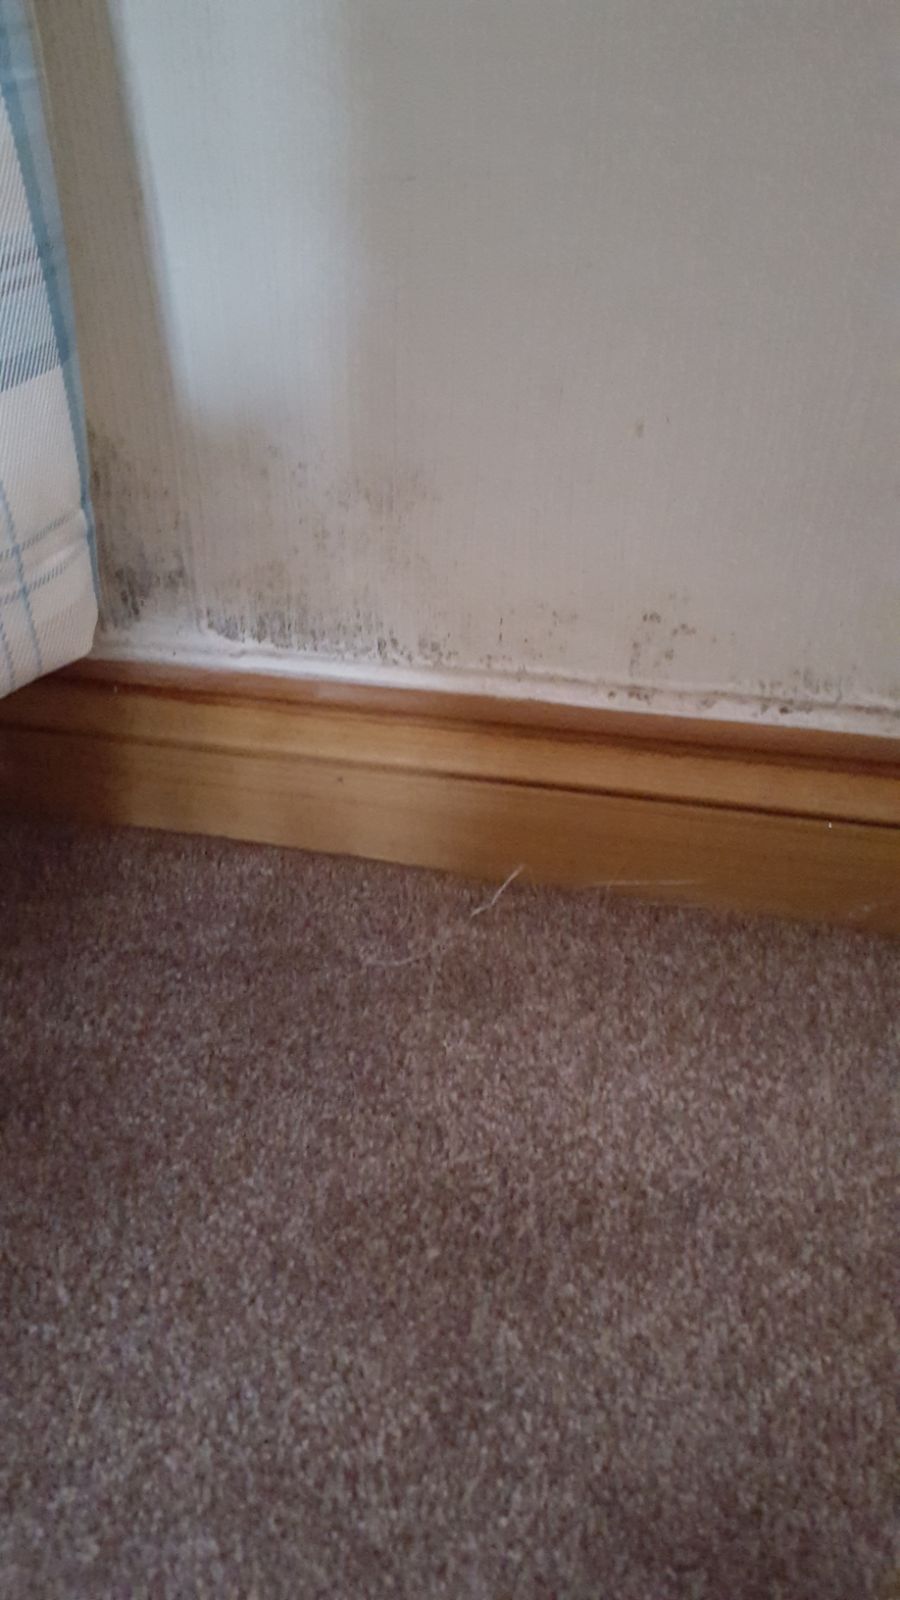 Damp Job sovereign recommend